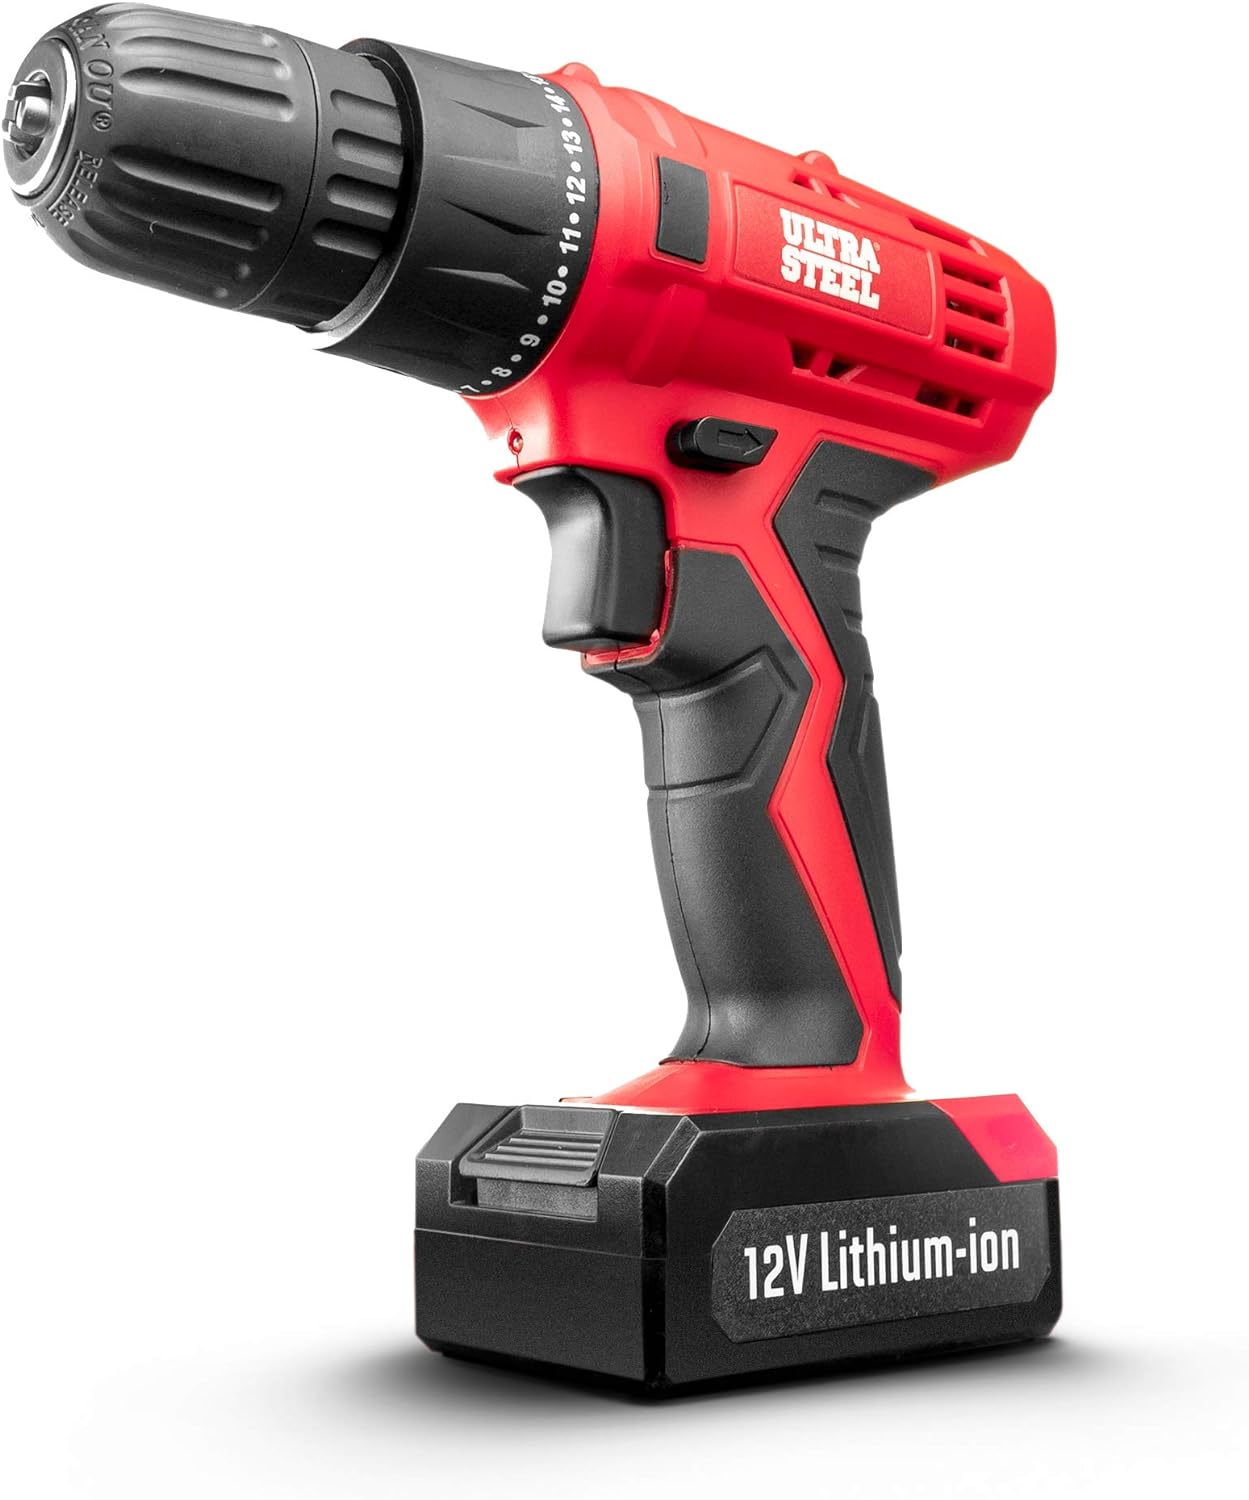 Ultra Steel 12V 1.3Ah Lithium-Ion 3/8&#226;&#128;&#157; Cordless Drill Driver, 18+1 Position, LED Light, Keyless Chuck, 1-Year